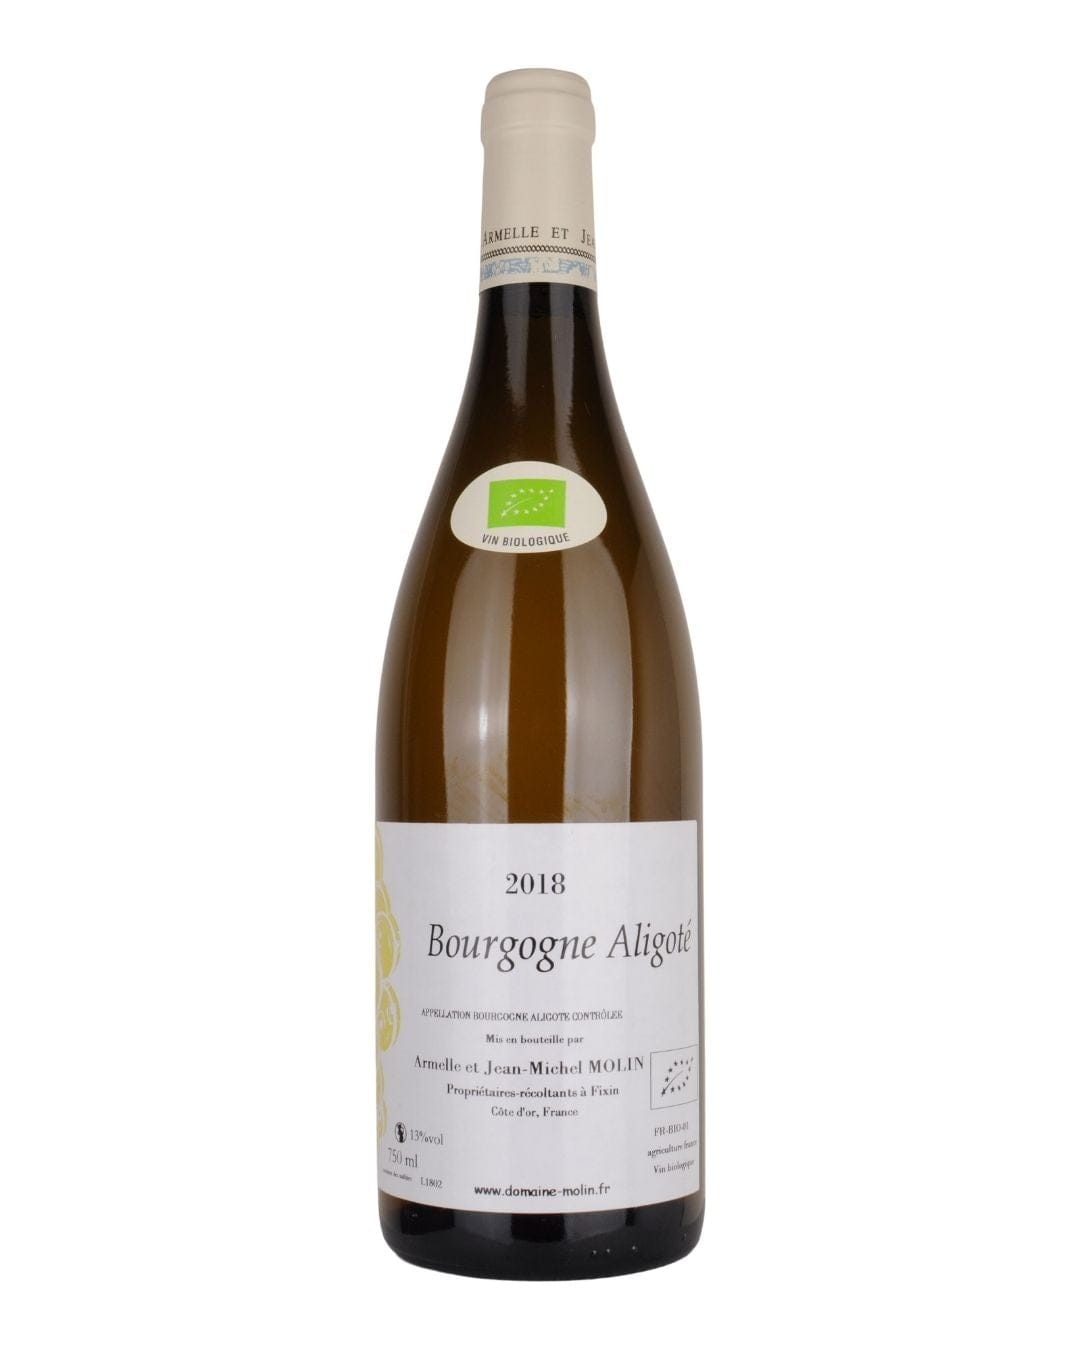 Shop Domaine Armelle et Jean-Michel Molin Domaine Armelle et Jean-Michel Molin Bourgogne Aligote 2018 online at PENTICTON artisanal French wine store in Hong Kong. Discover other French wines, promotions, workshops and featured offers at pentictonpacific.com 